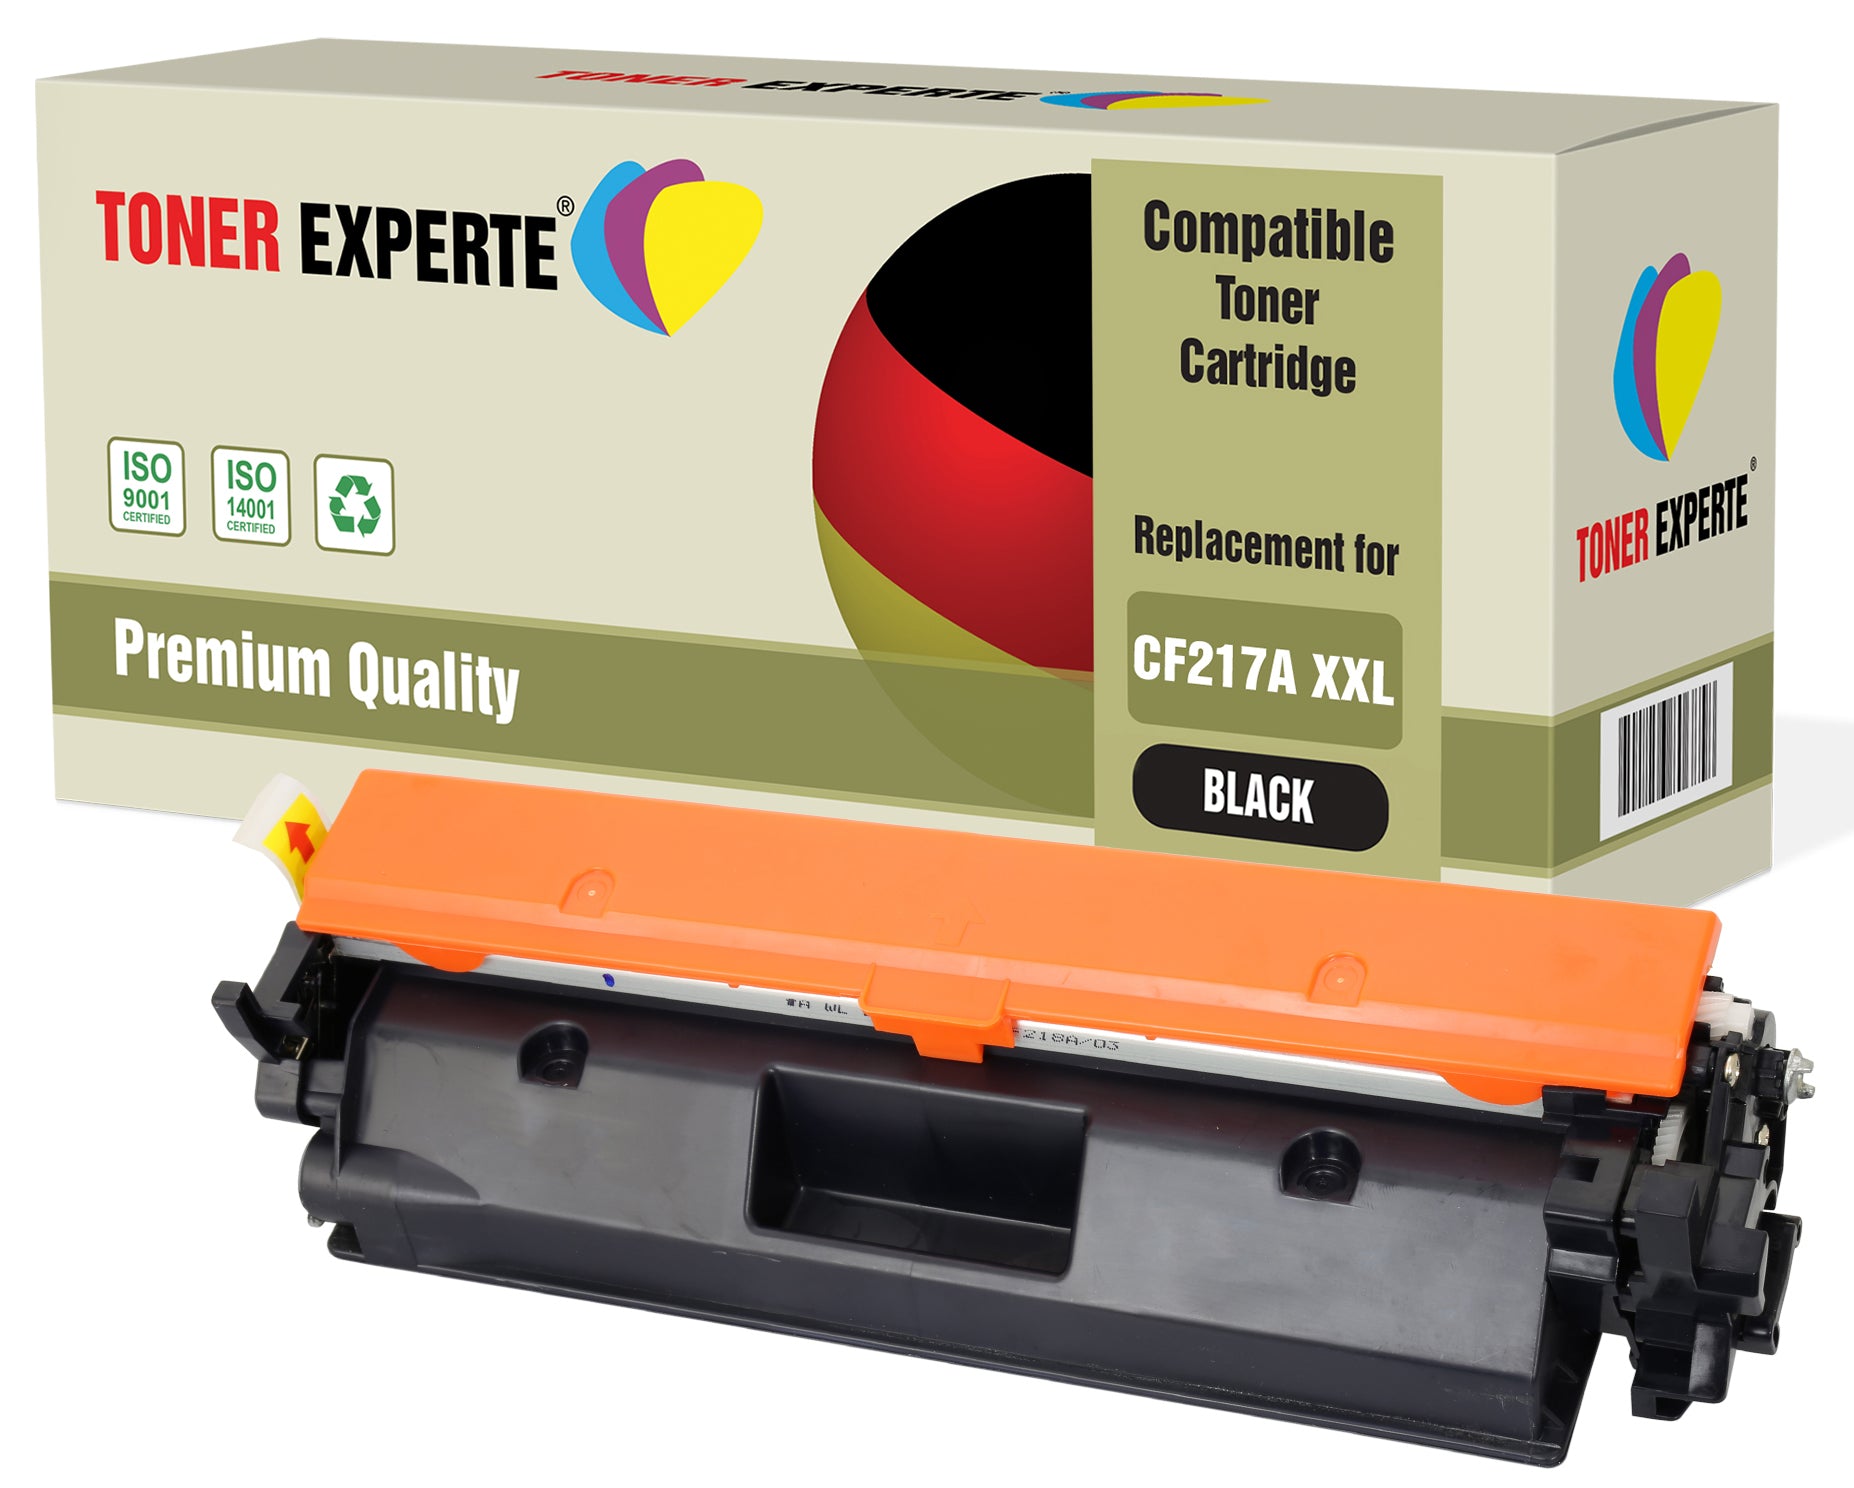 TONER EXPERTE® Compatible with CF217A 17A XXL Premium Toner Cartridge Replacement for HP LaserJet Pro MFP M130nw, M130fn, M130fw, M130a, M102a, M102w